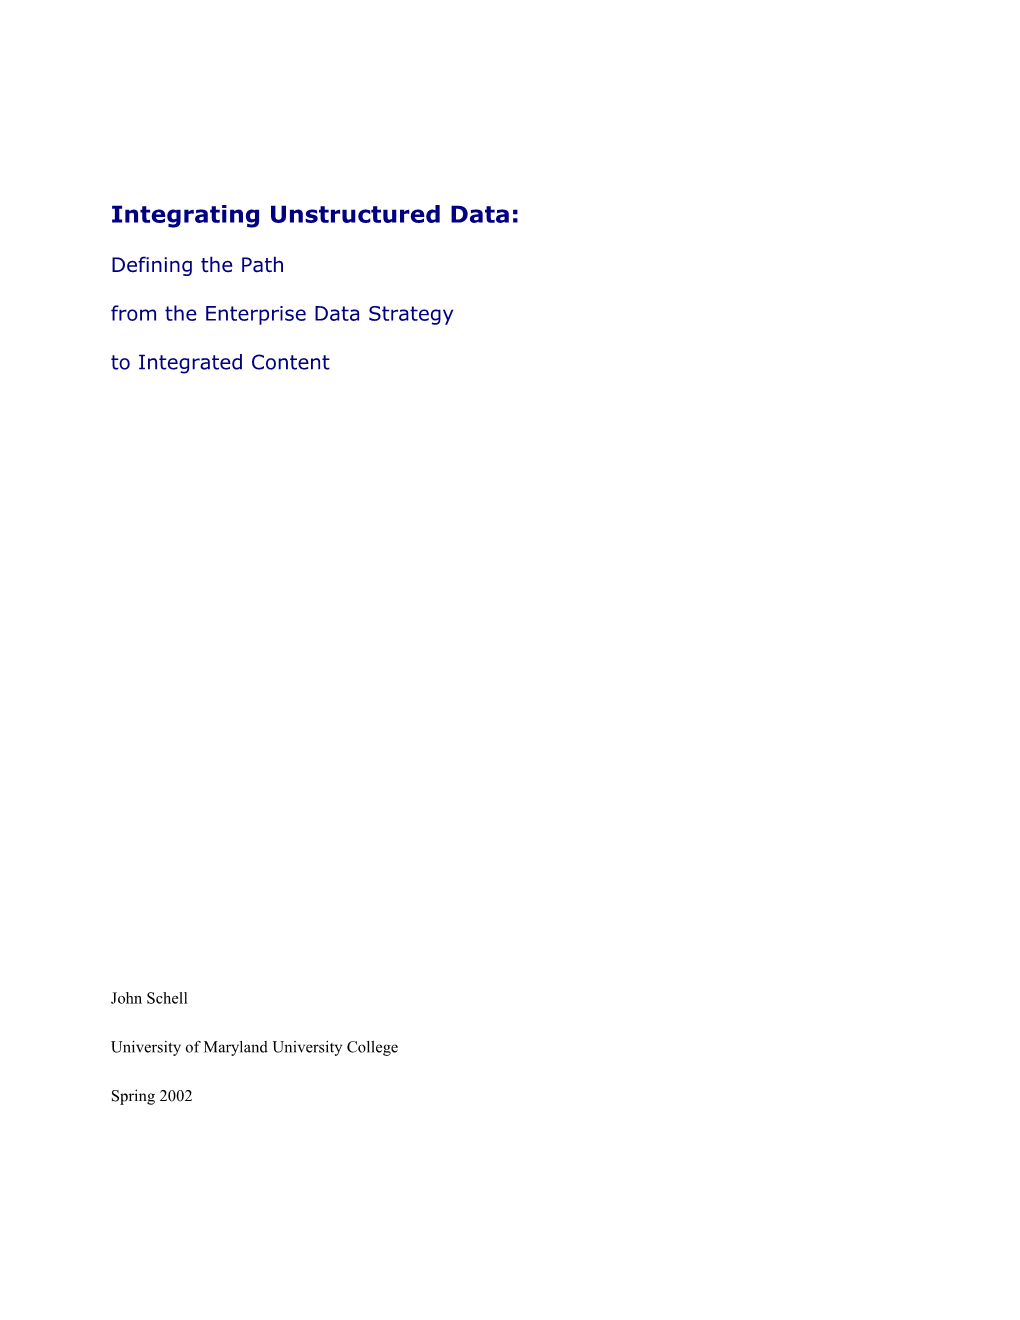 Integrating Unstructured Data